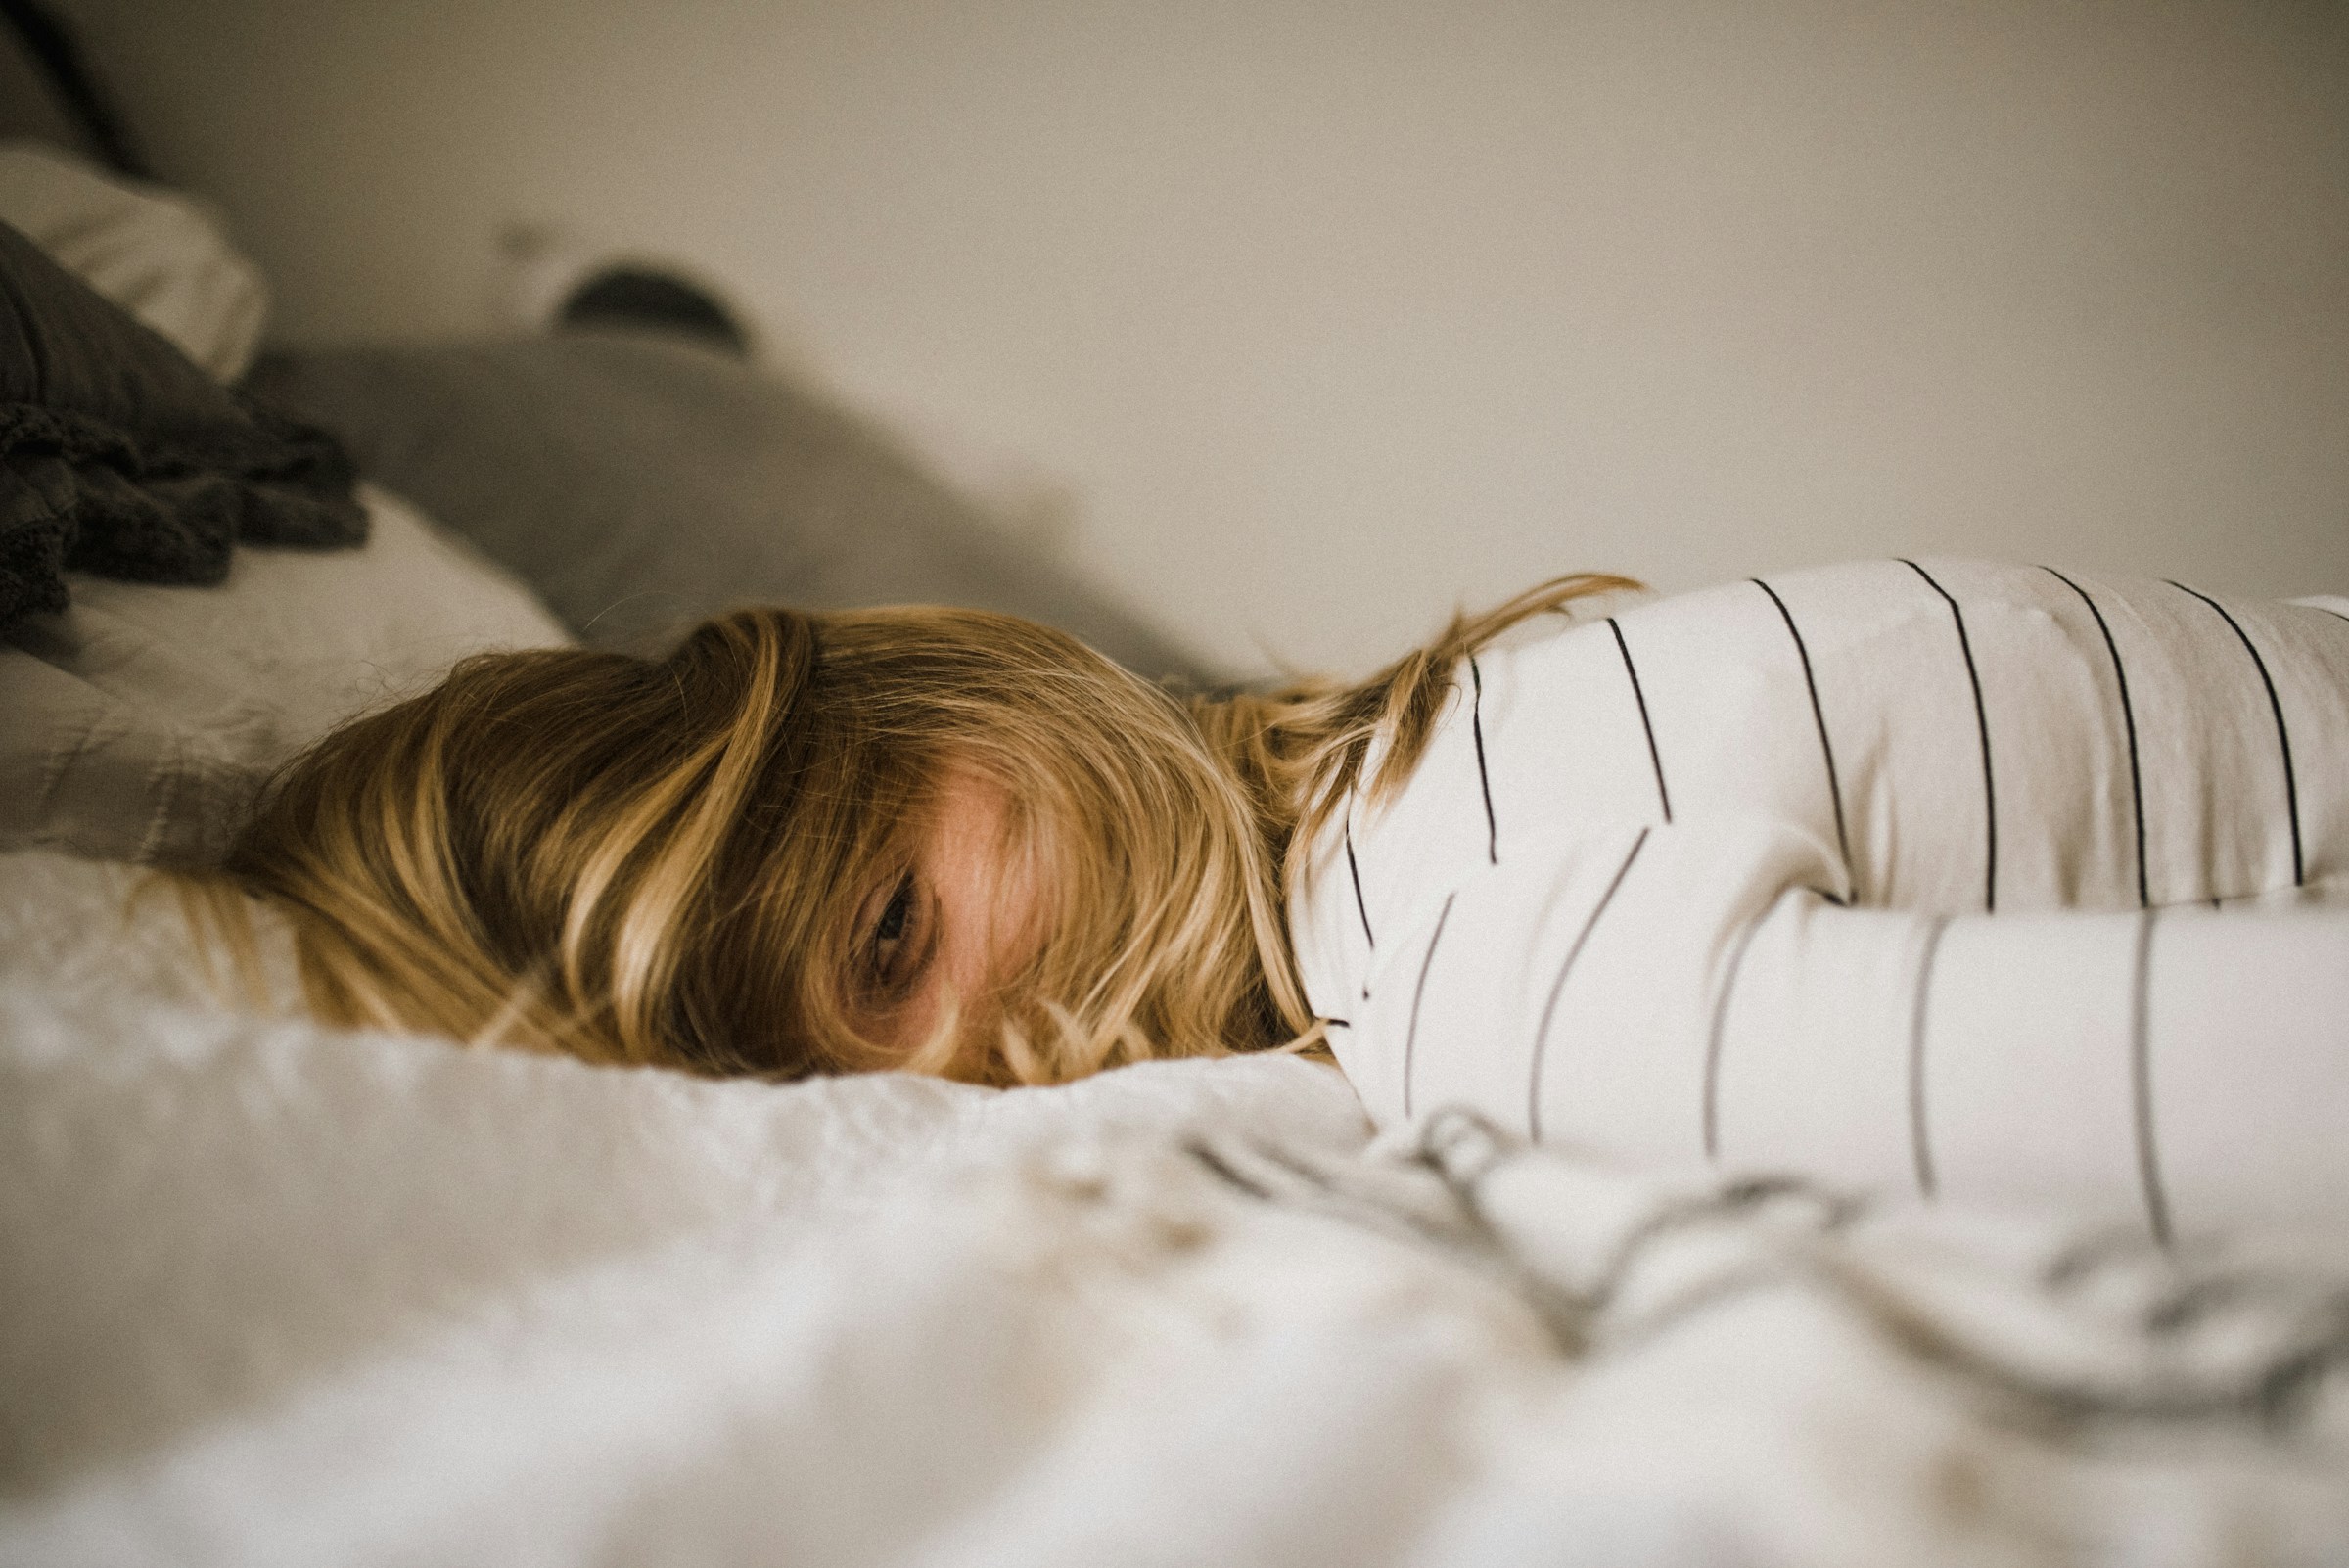 A woman lying on bed | Source: Unsplash